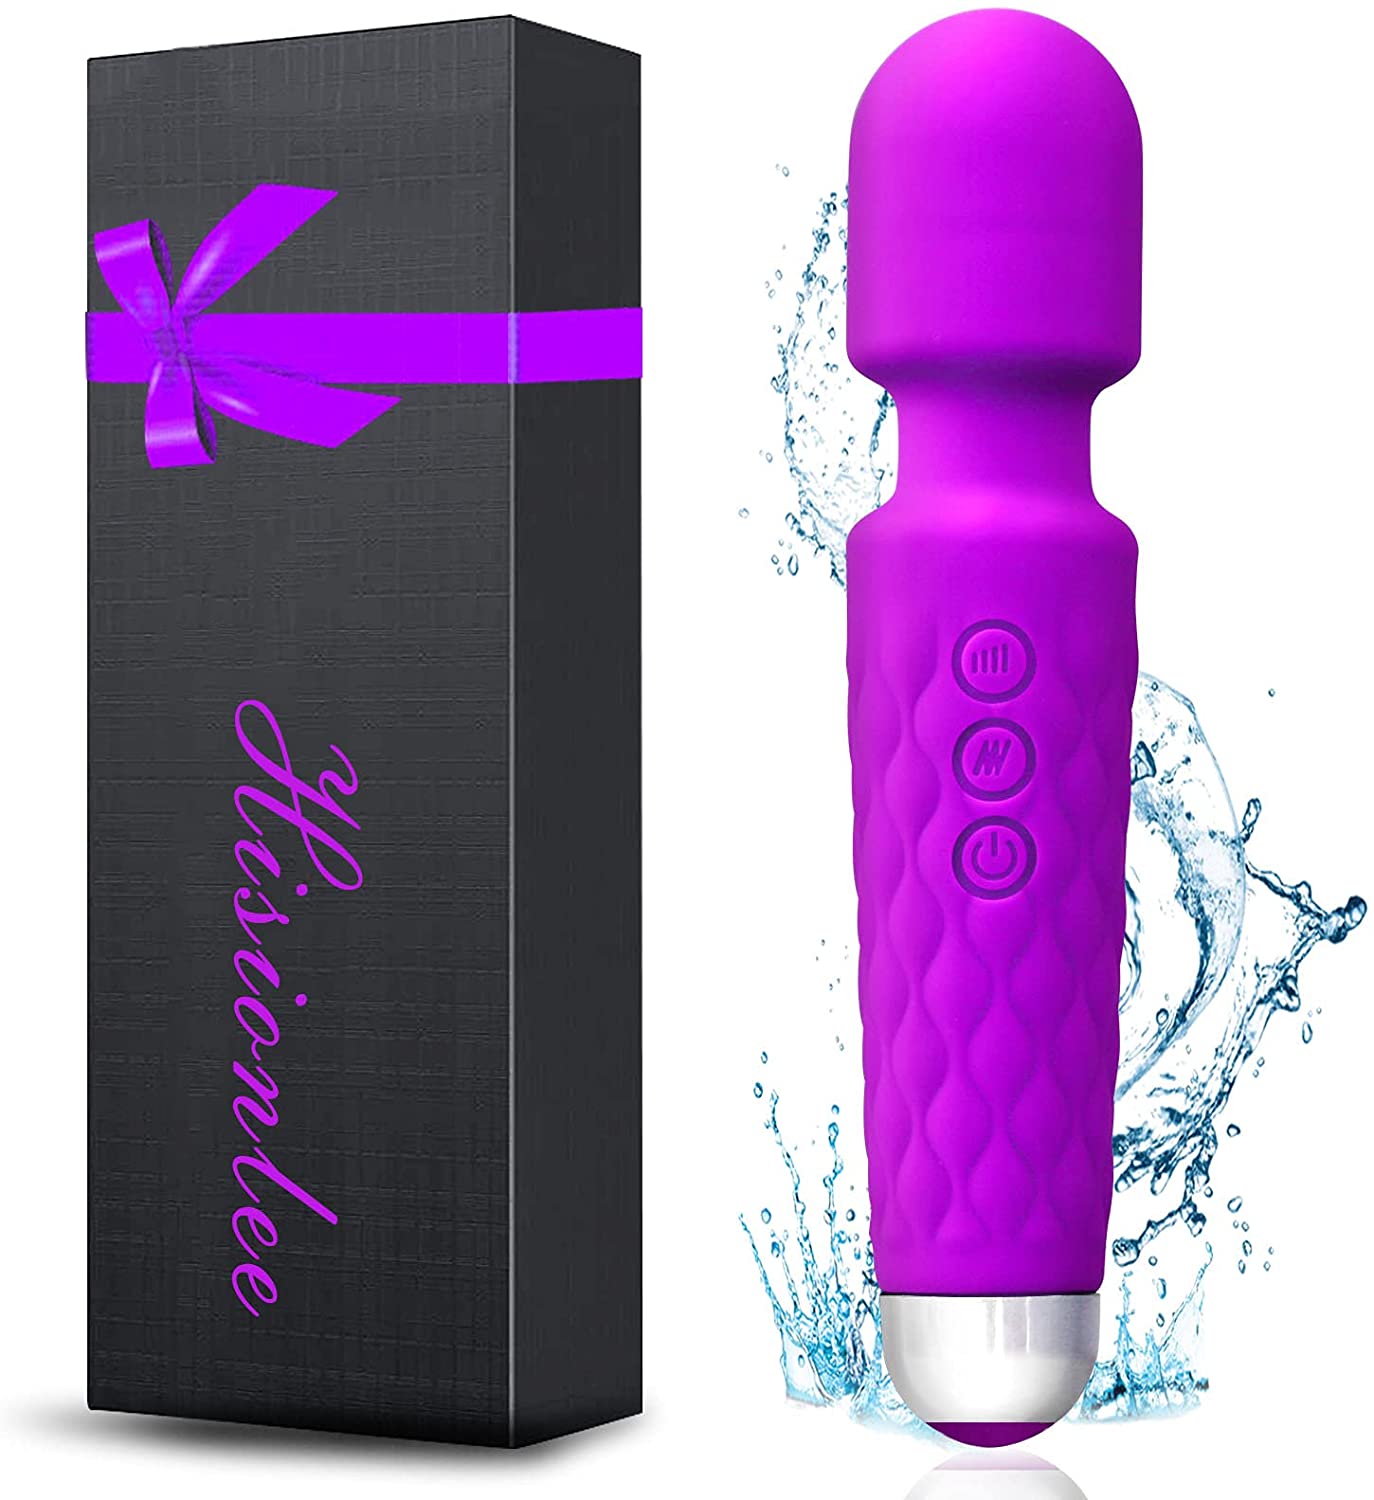 Portable Personal Rechargeable Mini Vibrate Wand Massager